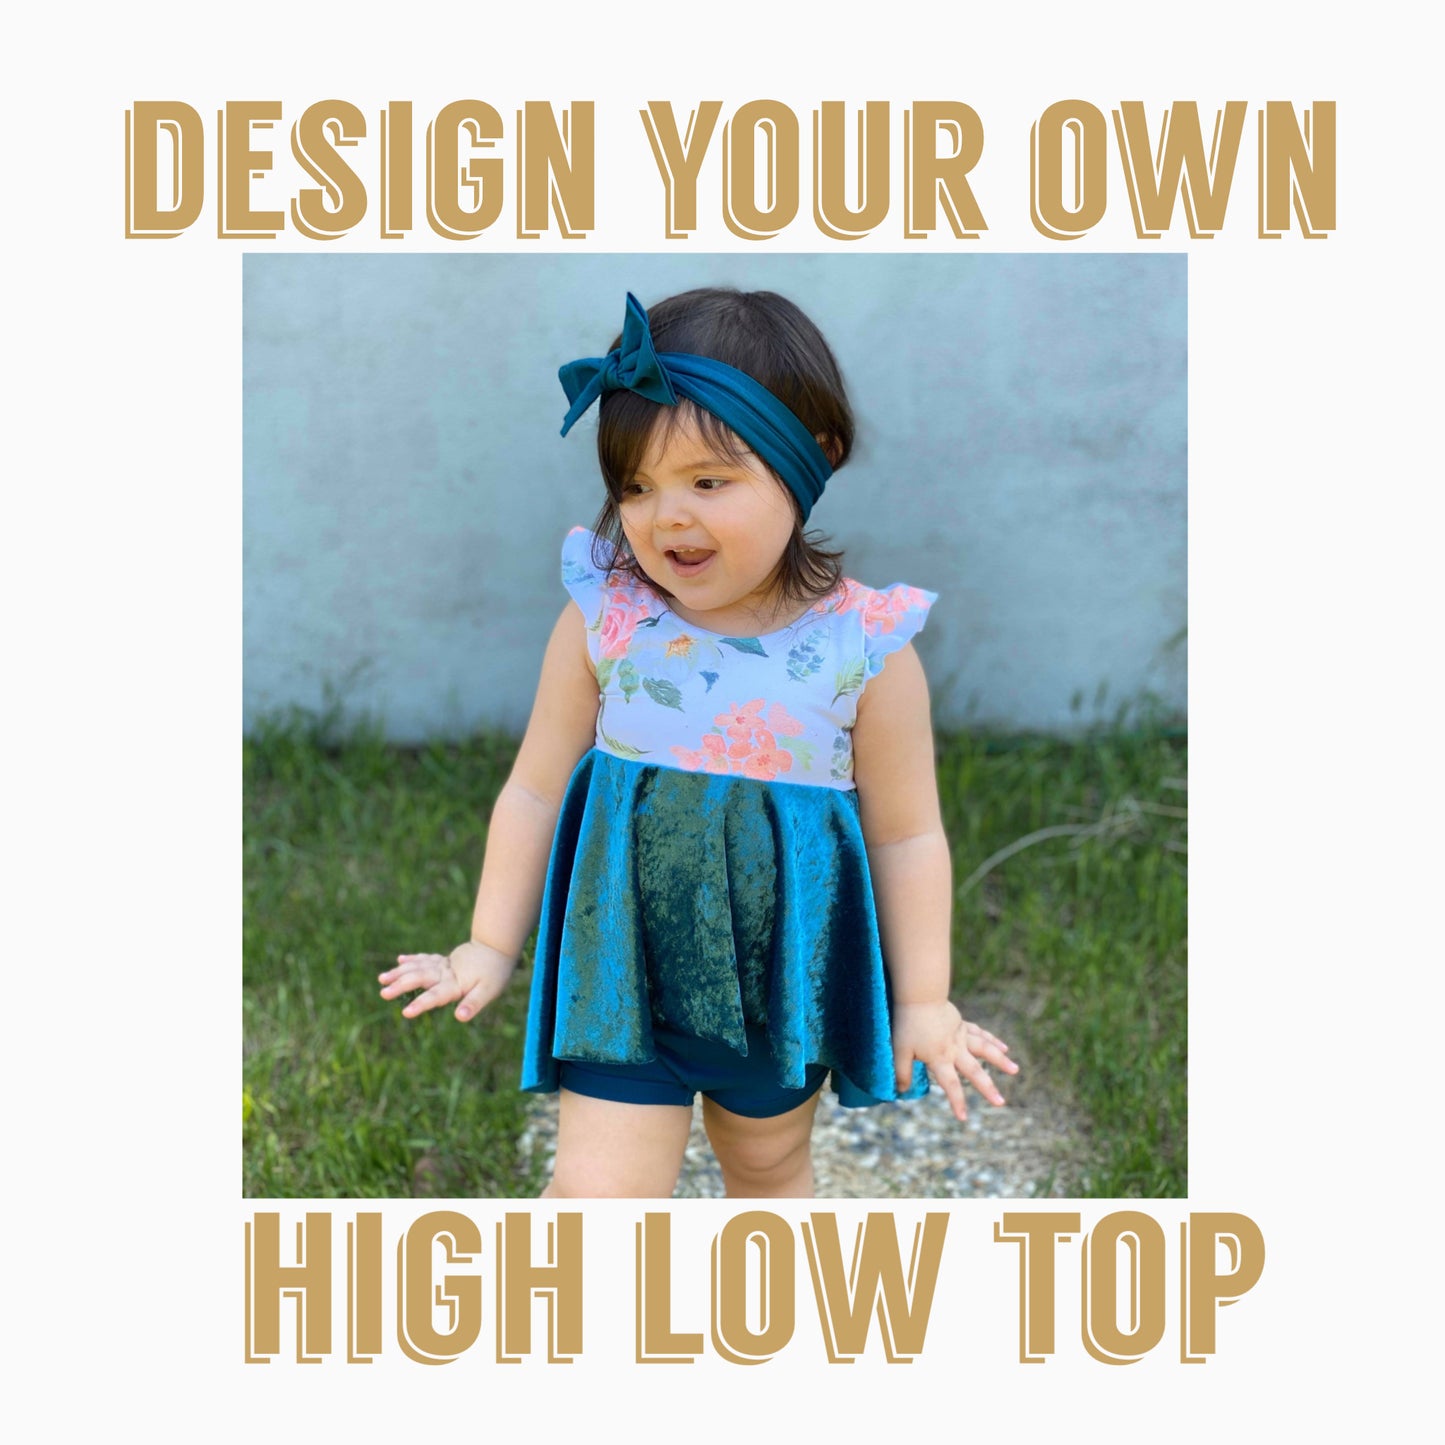 Design Your Own | High Low Top